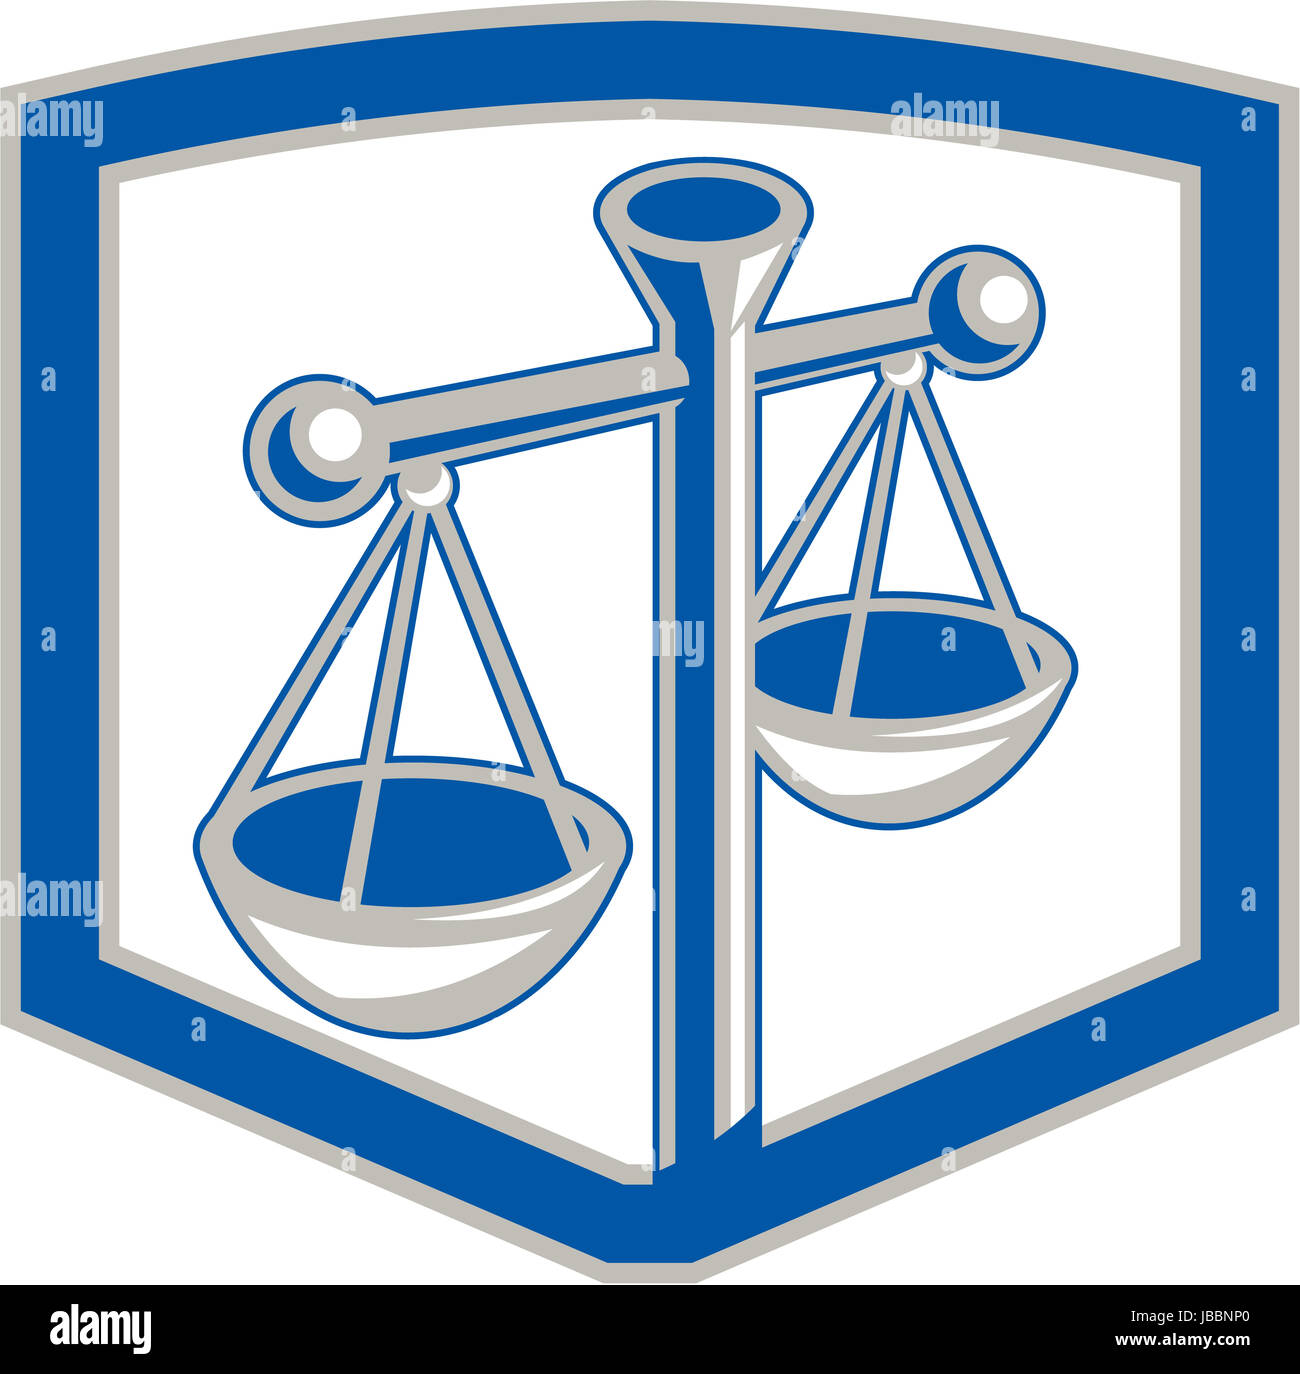 Illustration of weighing scales of justice set inside shield done in retro style on isolated background. Stock Photo